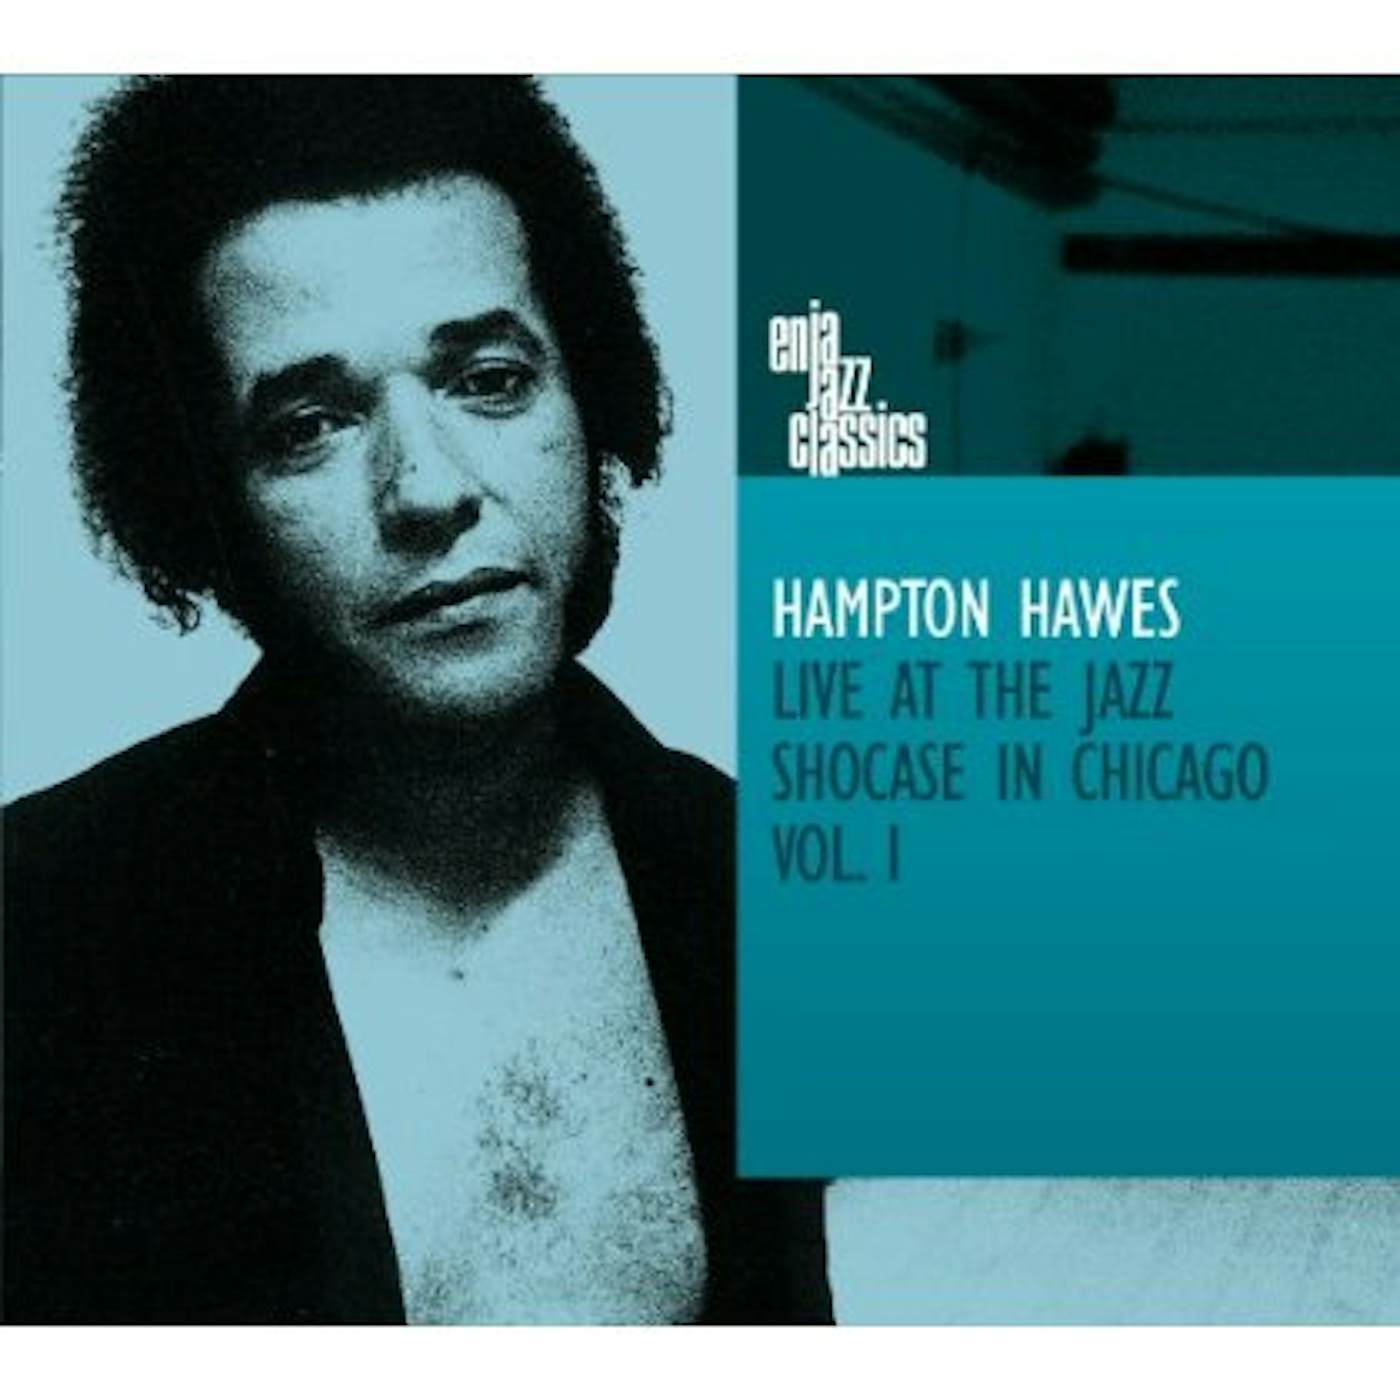 Hampton Hawes LIVE AT THE JAZZ SHOWCASE IN CHICAGO 1 CD